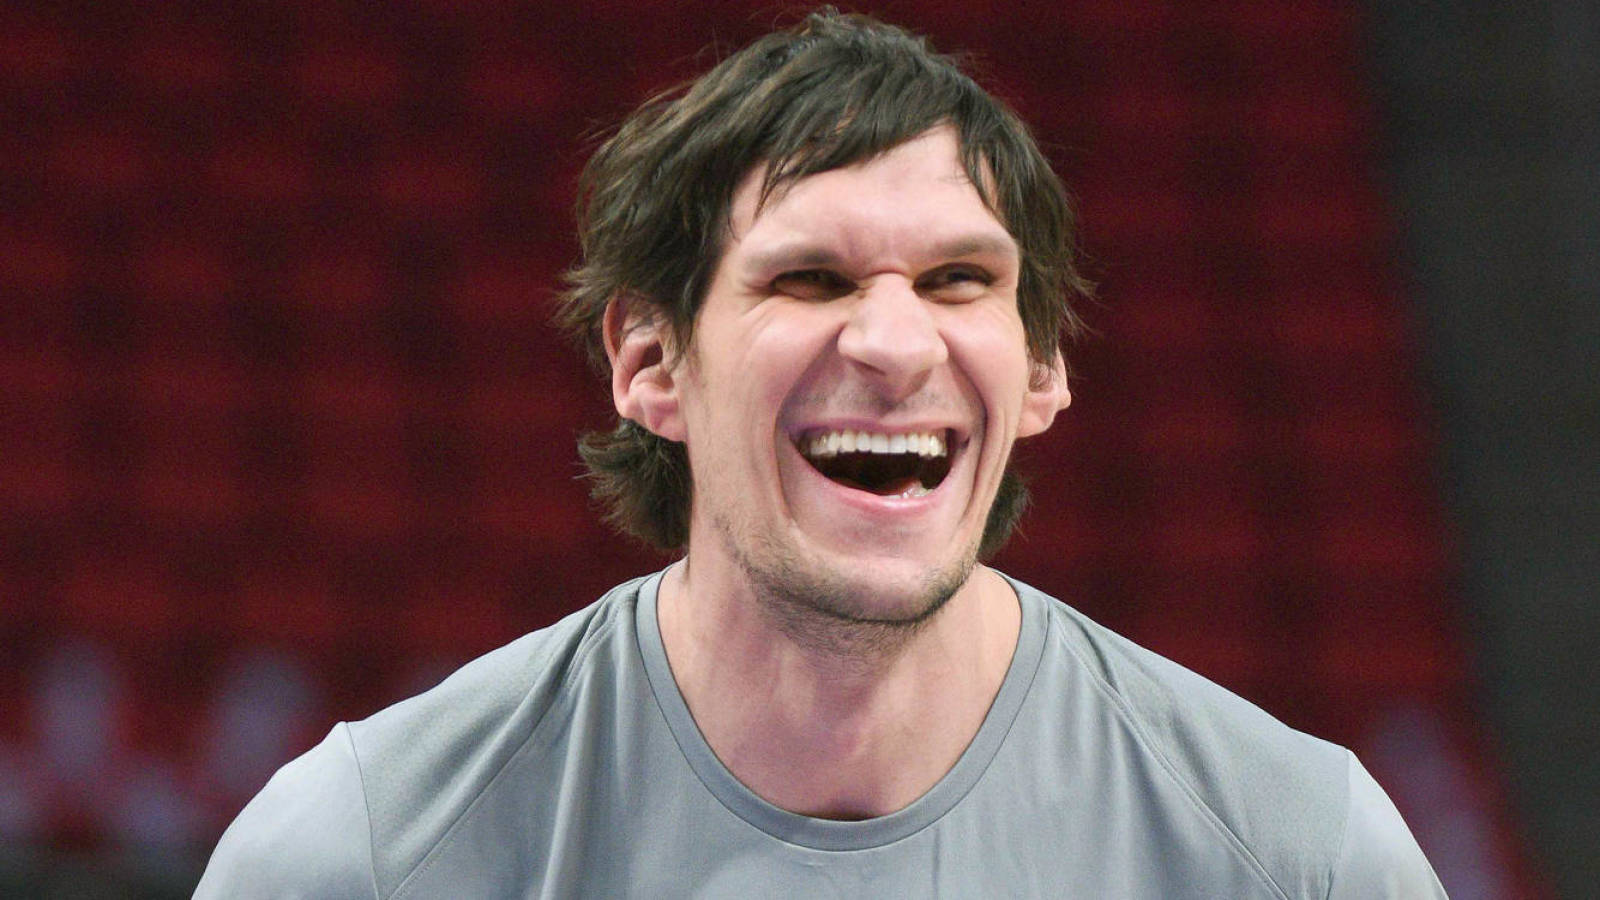 Boban Marjanovic: I enjoy every moment with a smile on my face - Eurohoops